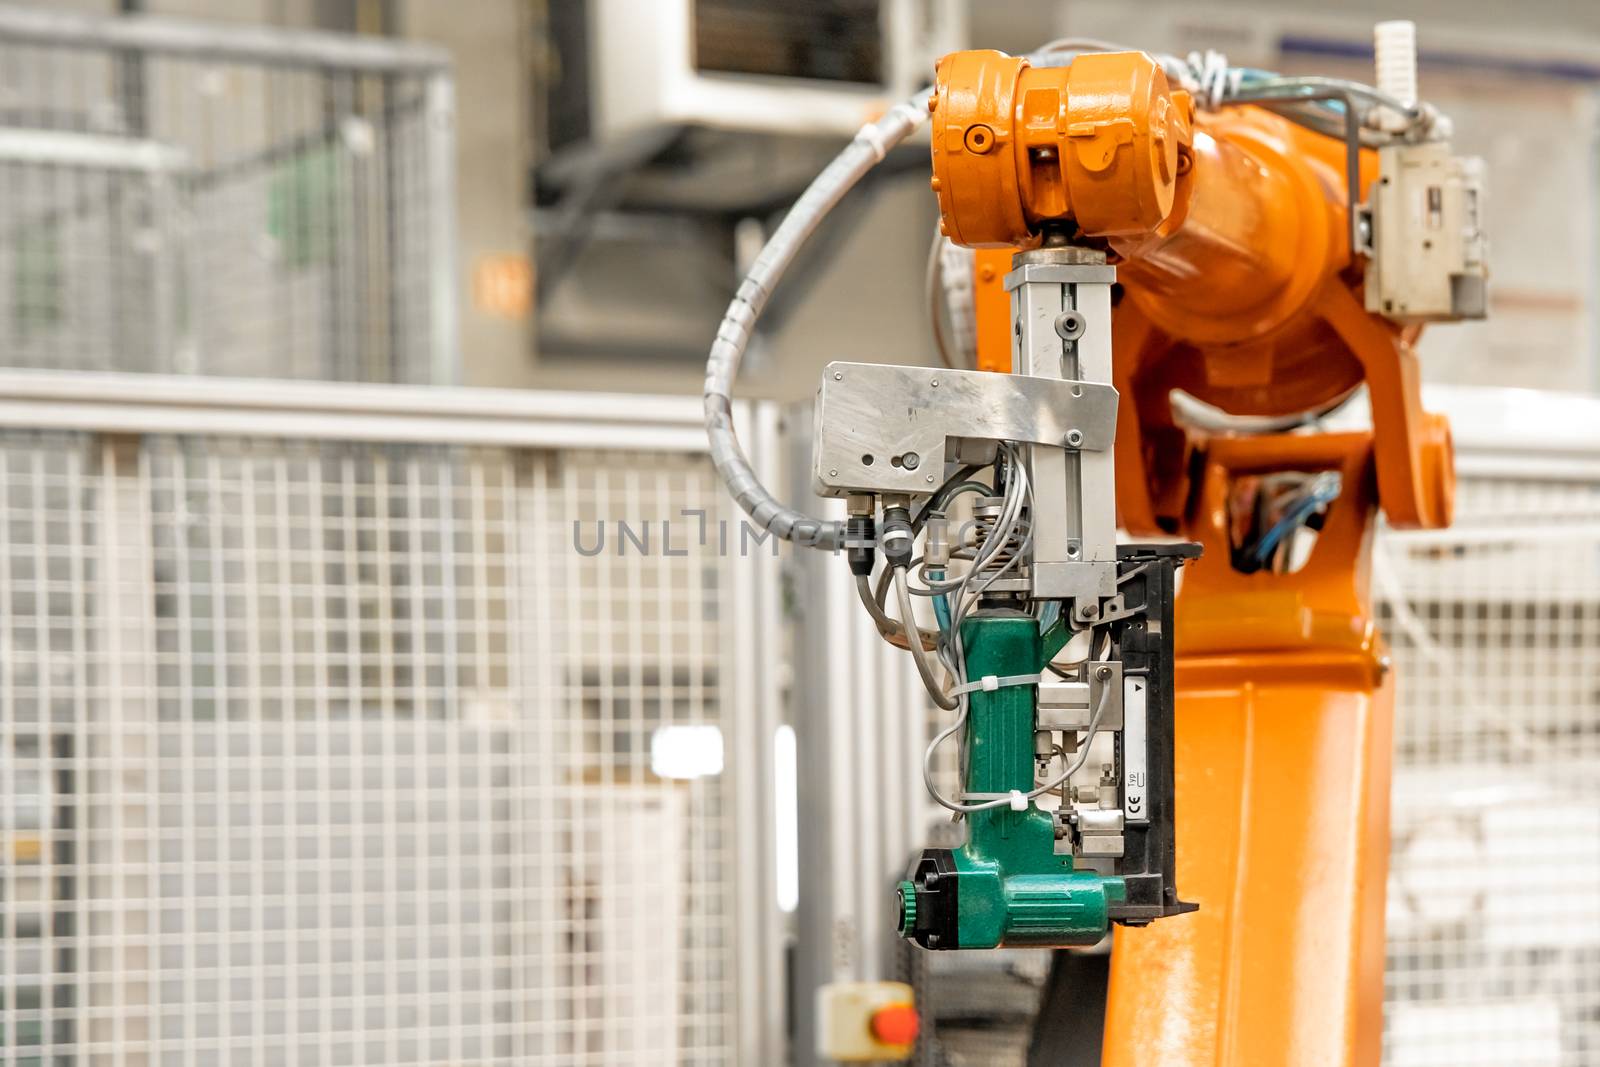 Detail of a robotic arm in a factory, auto industry.